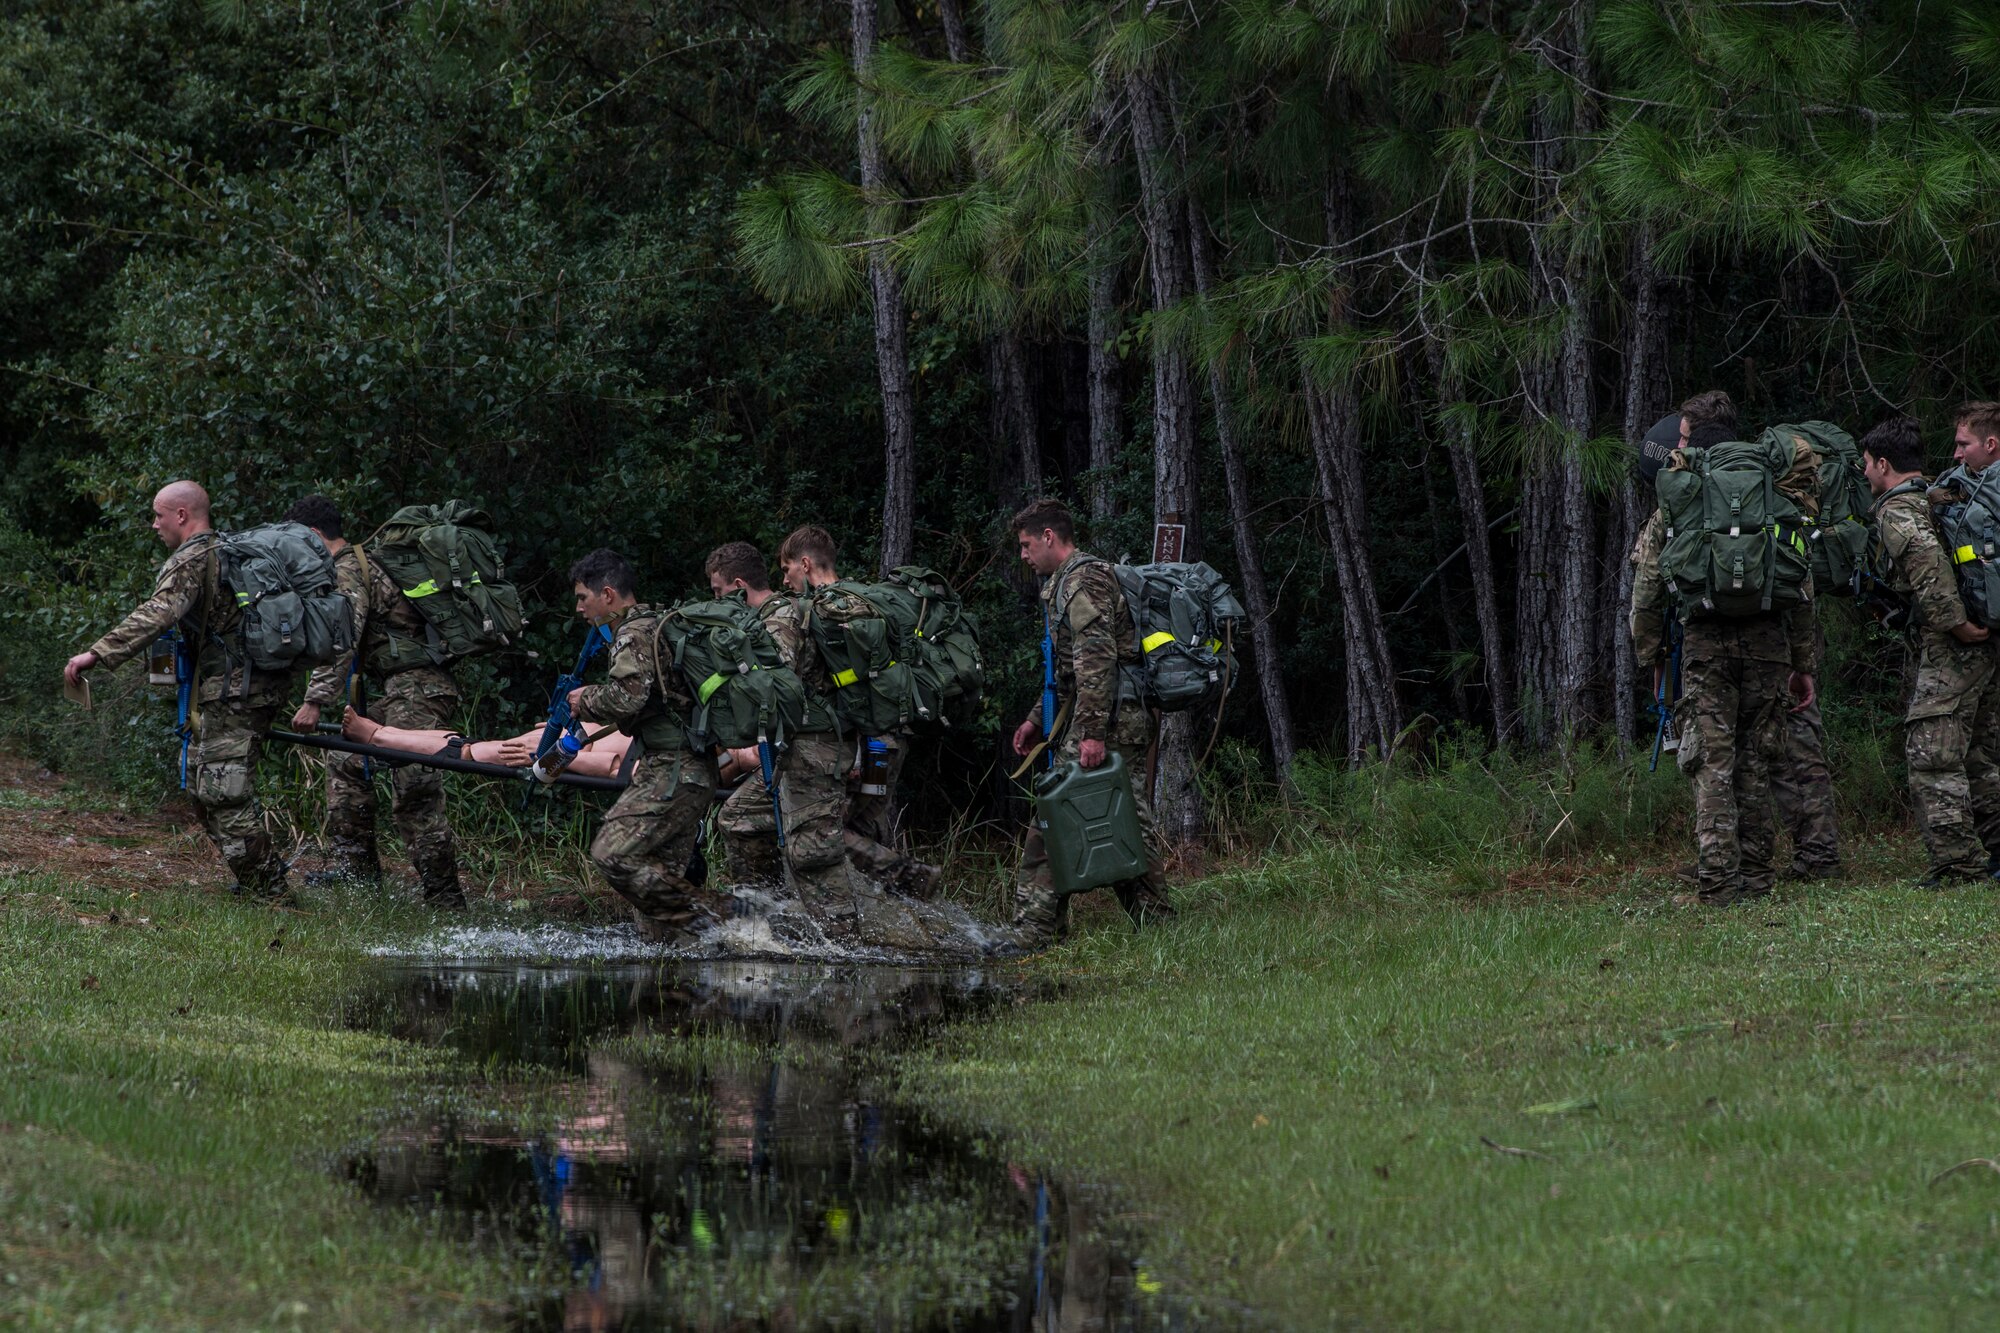 Four Special Tactics tactical air control party candidates carry a litter across a creek in the distance as another candidate crosses the picture closer to the camera. They appear to be moving quickly.